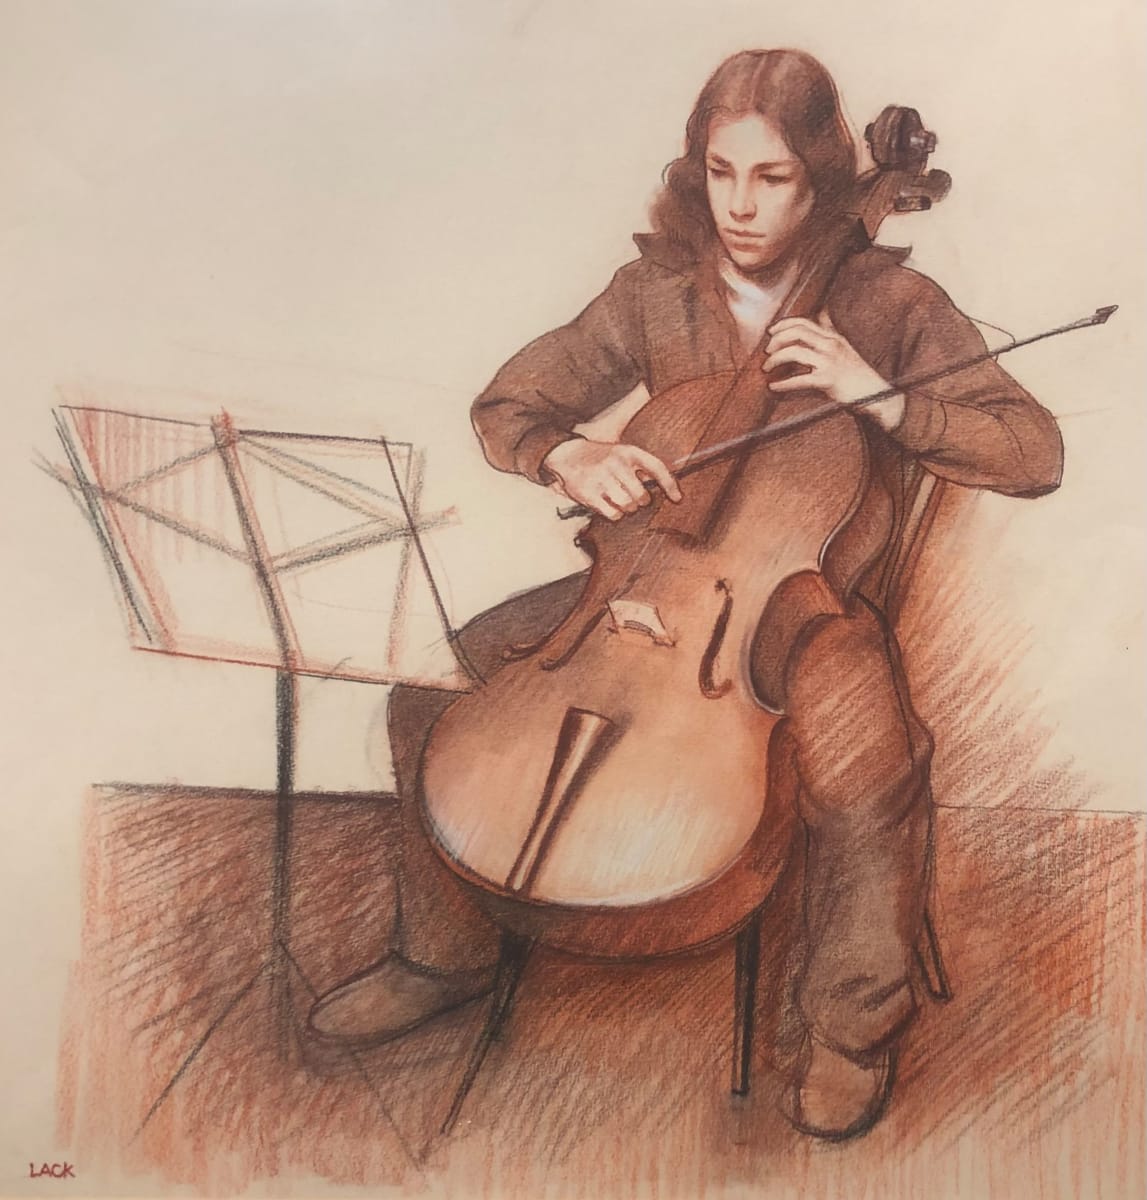 Peter Playing the Cello by Richard Lack  Image: Price on request